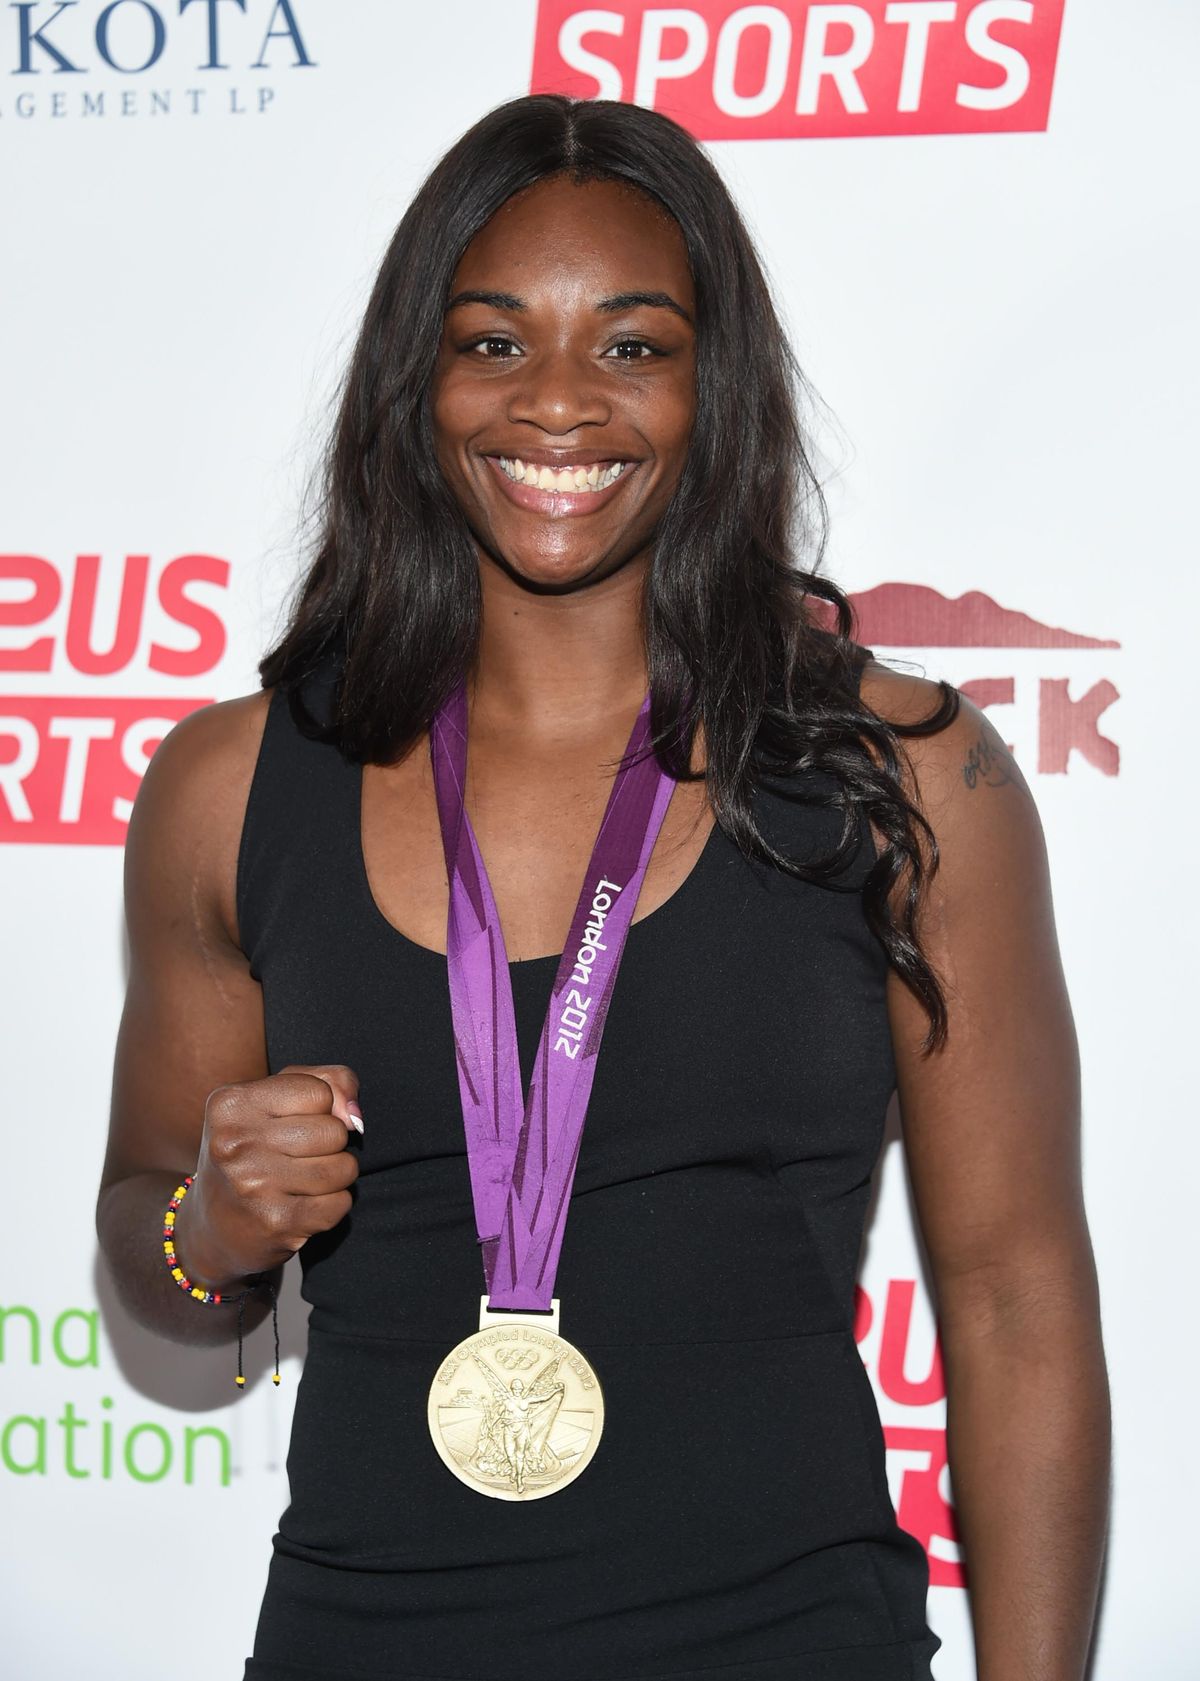 Claressa Shields ready to throw punch at history | The ...